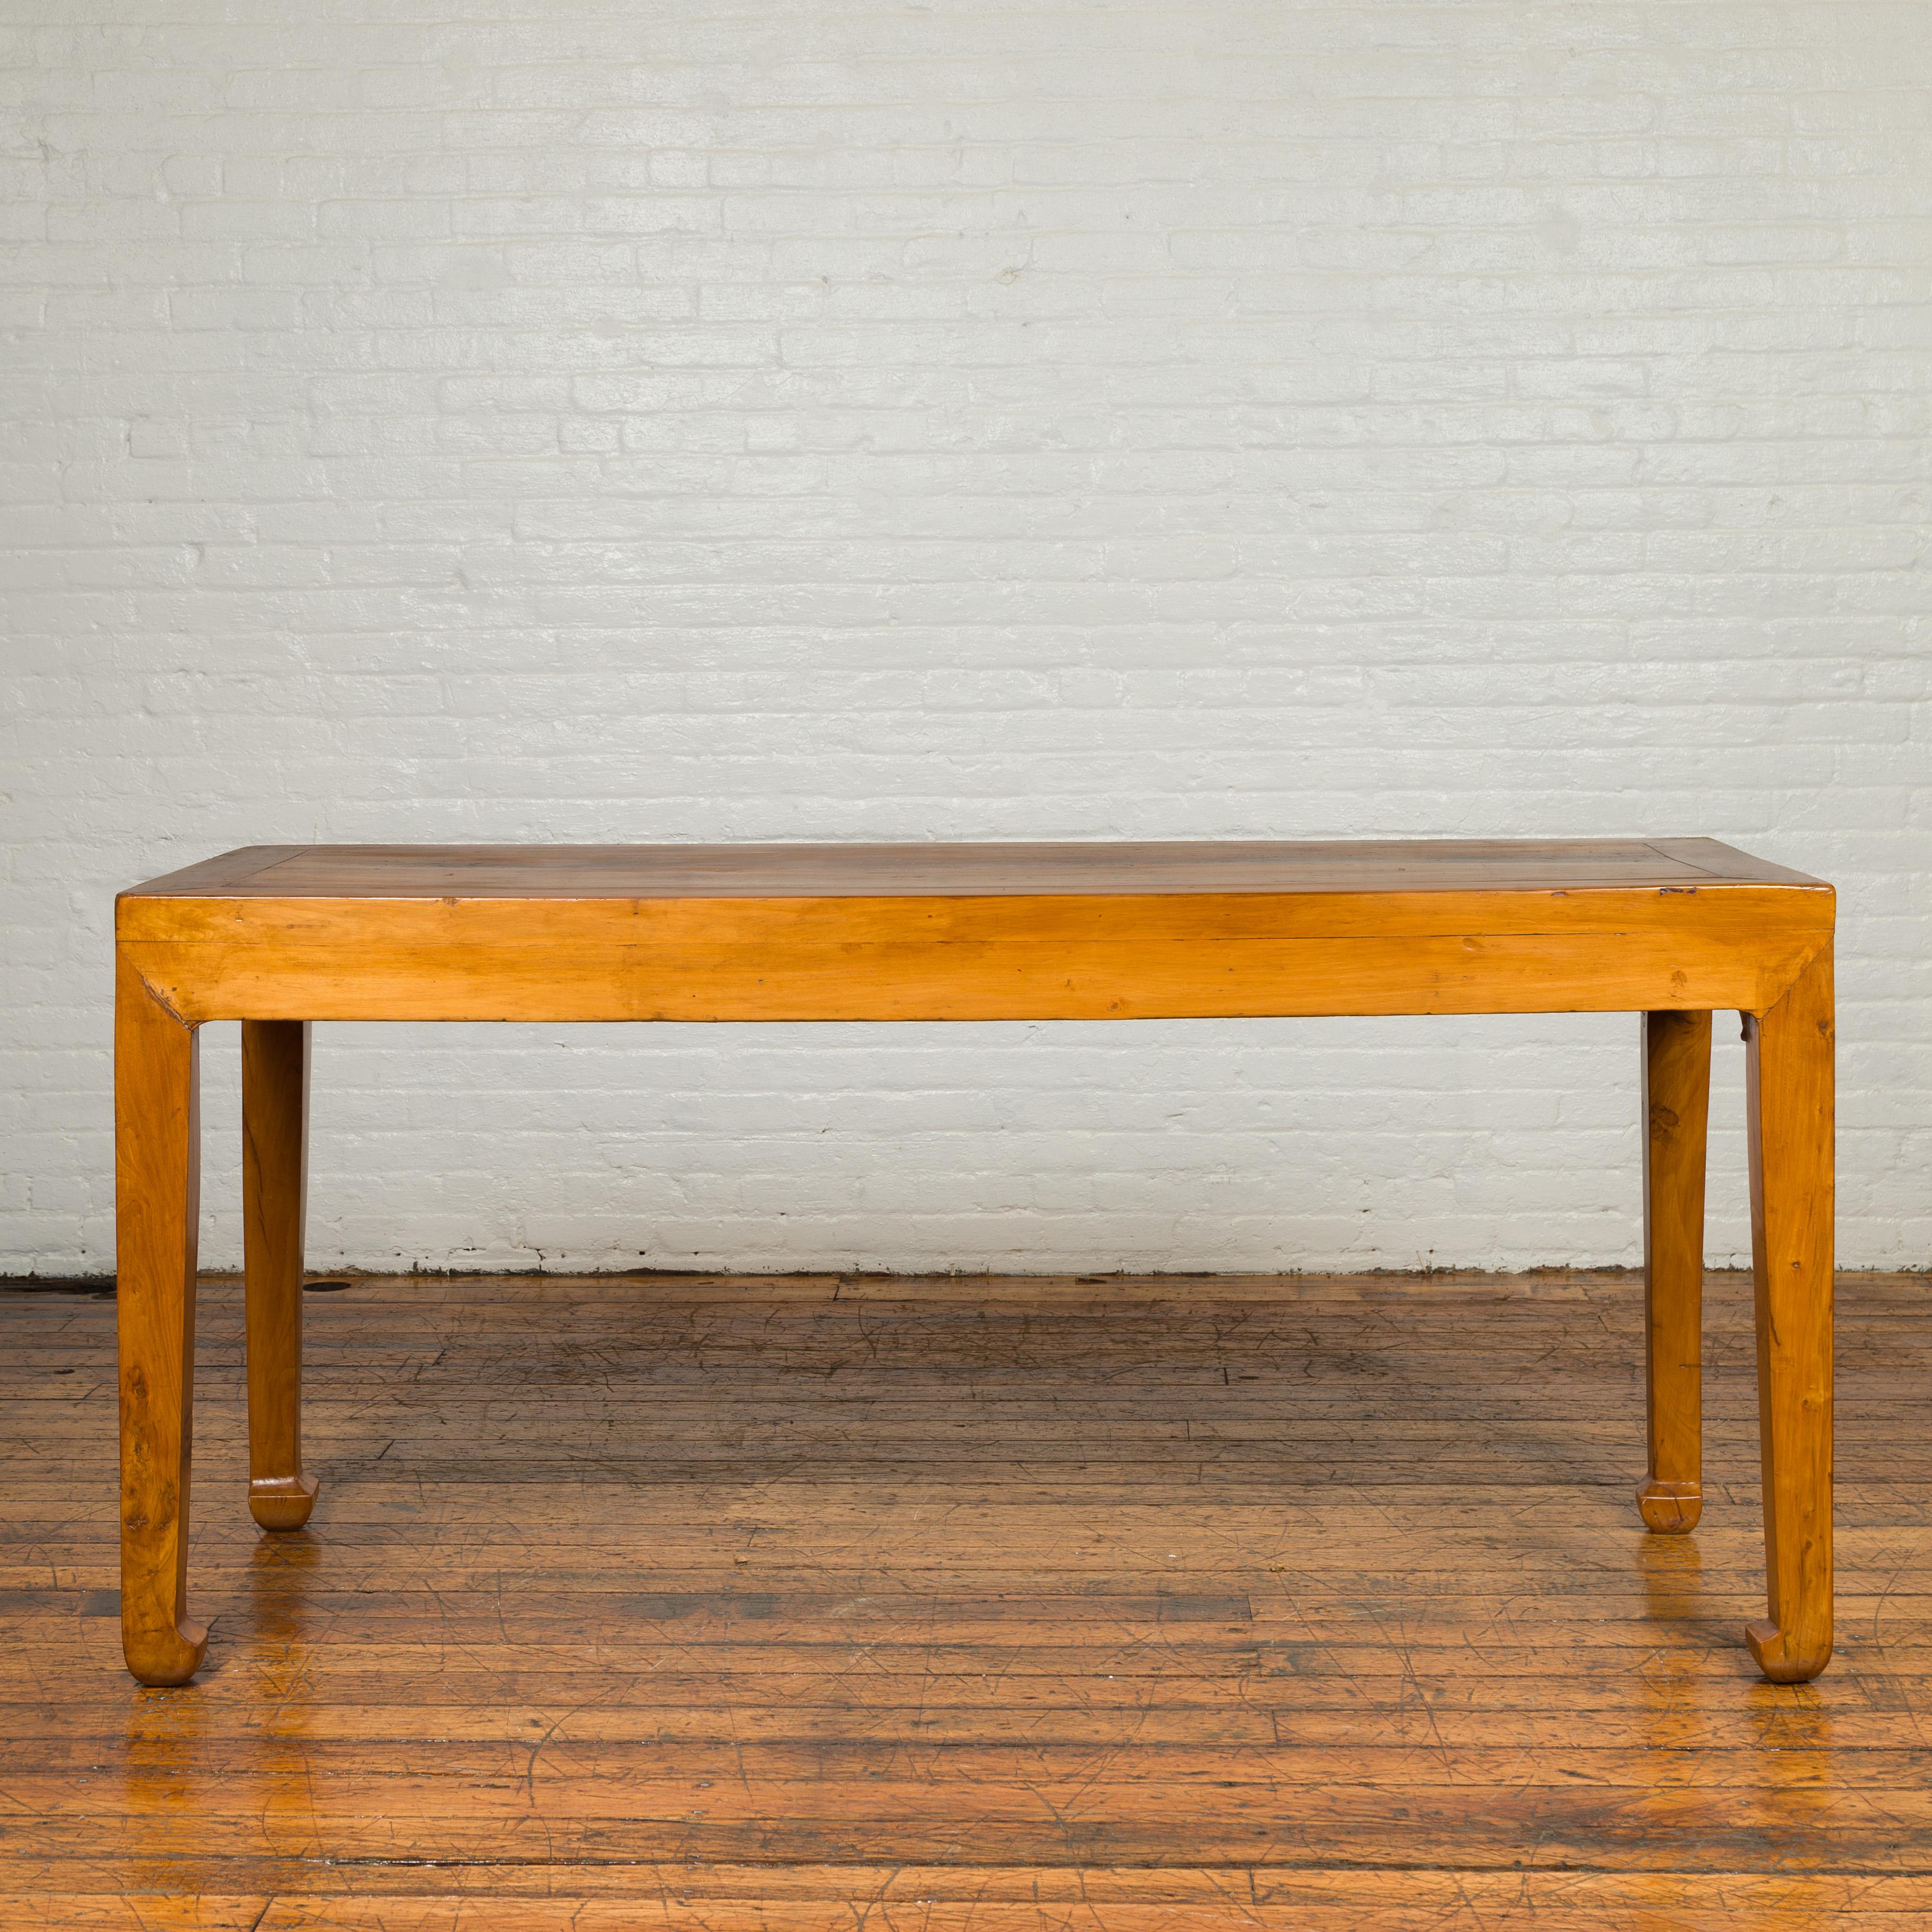 A Chinese Qing Dynasty elmwood console table with distressed patina and horsehoof legs. Crafted in China during the Qing Dynasty, this elmwood console table features a rectangular planked top, sitting above four slender legs with horsehoof